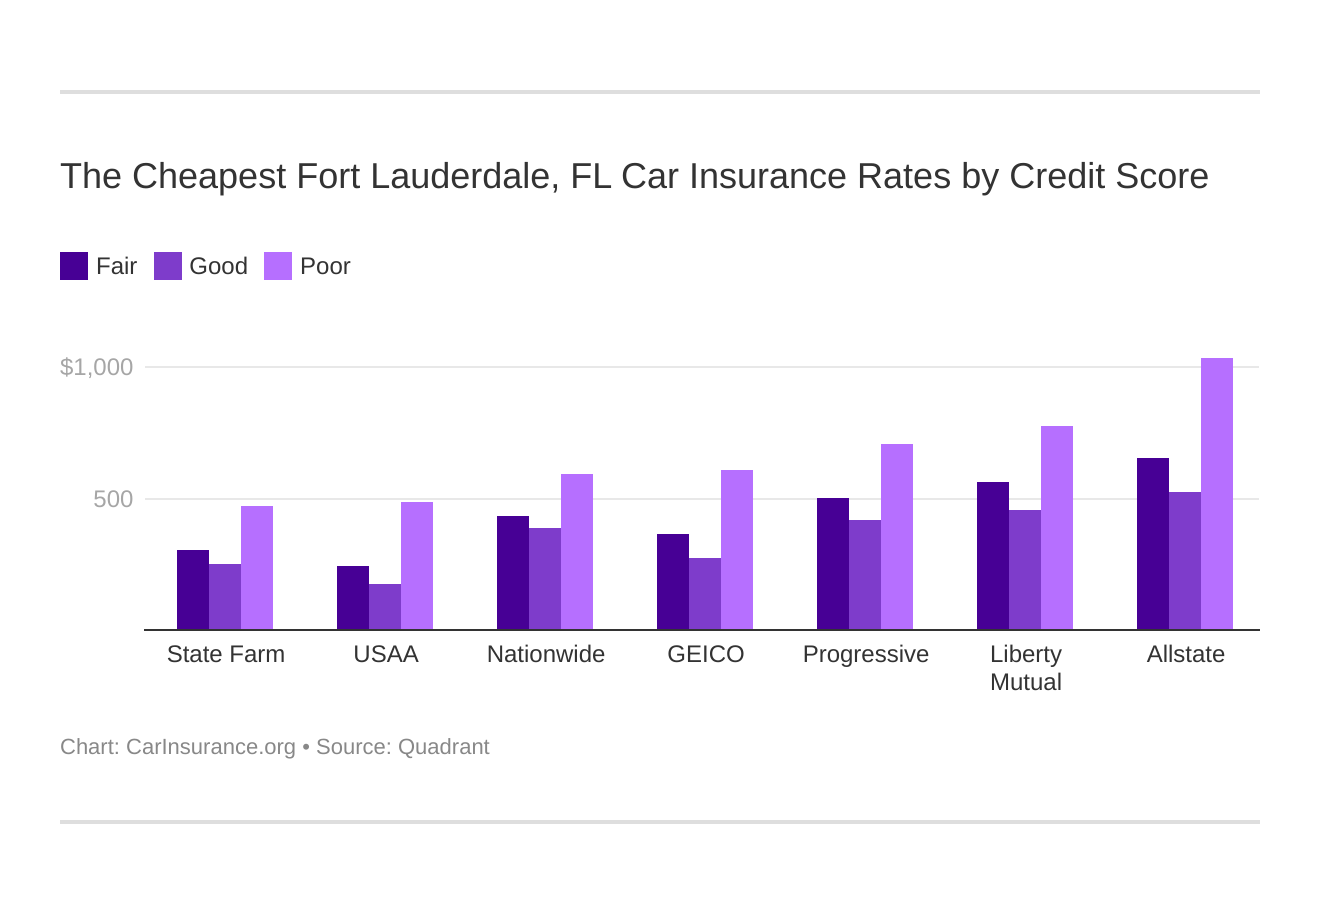 The Cheapest Fort Lauderdale, FL Car Insurance Rates by Credit Score